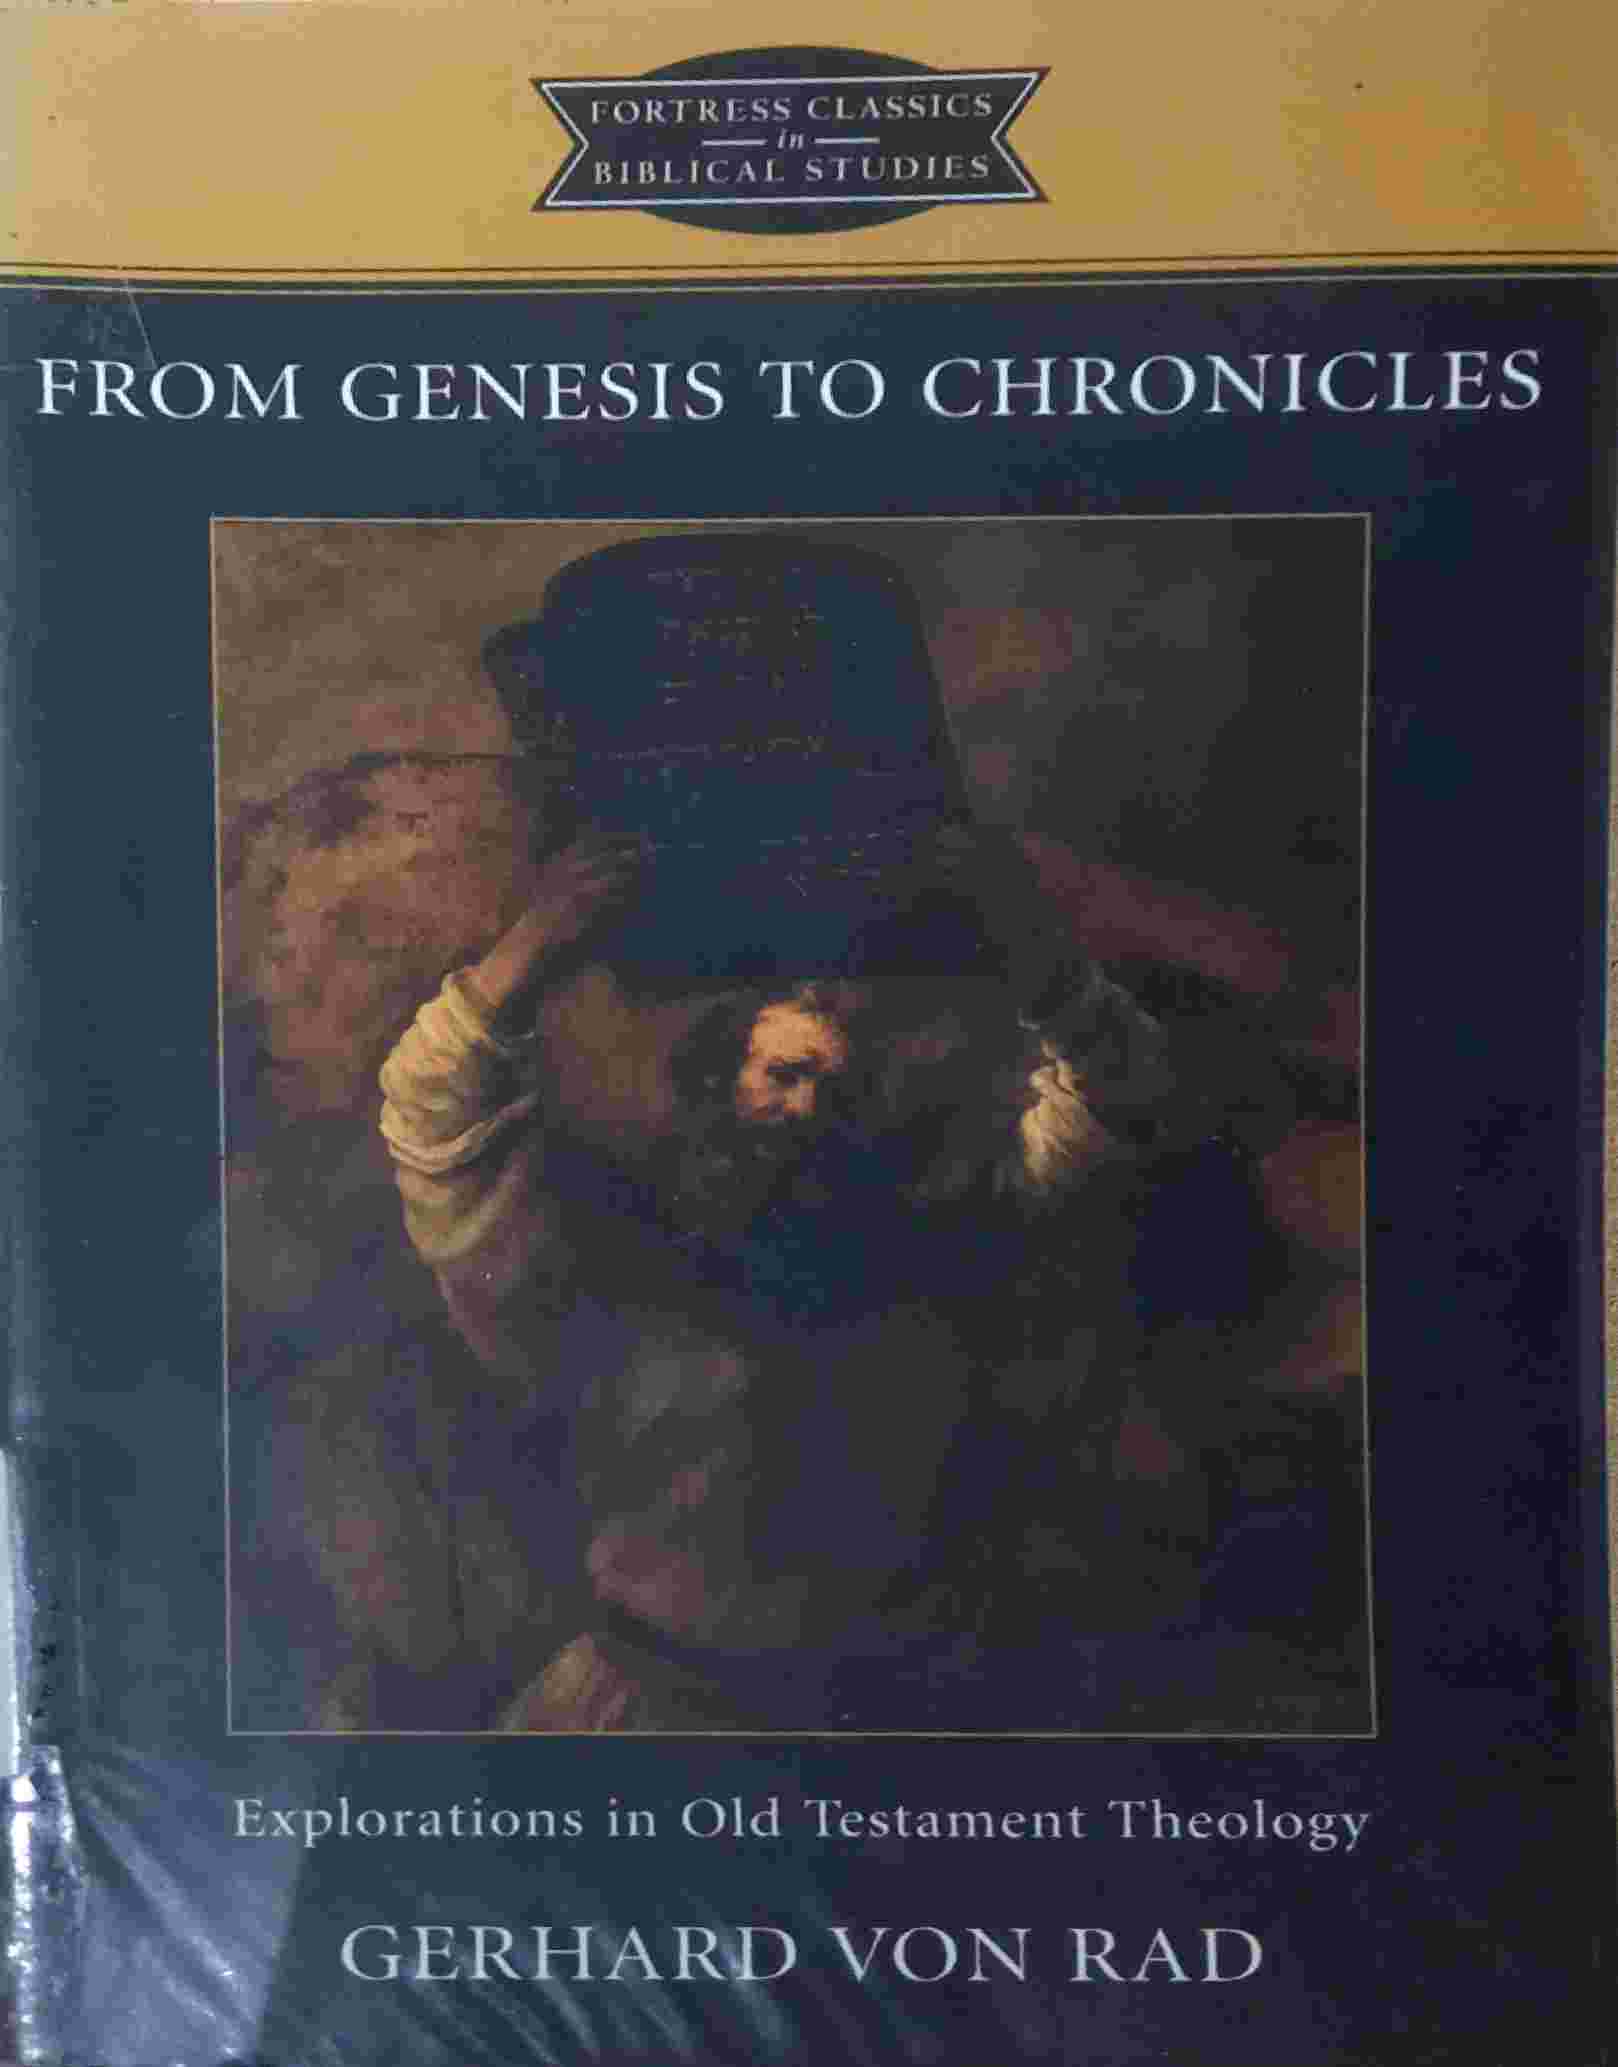 FROM GENESIS TO CHRONICLES